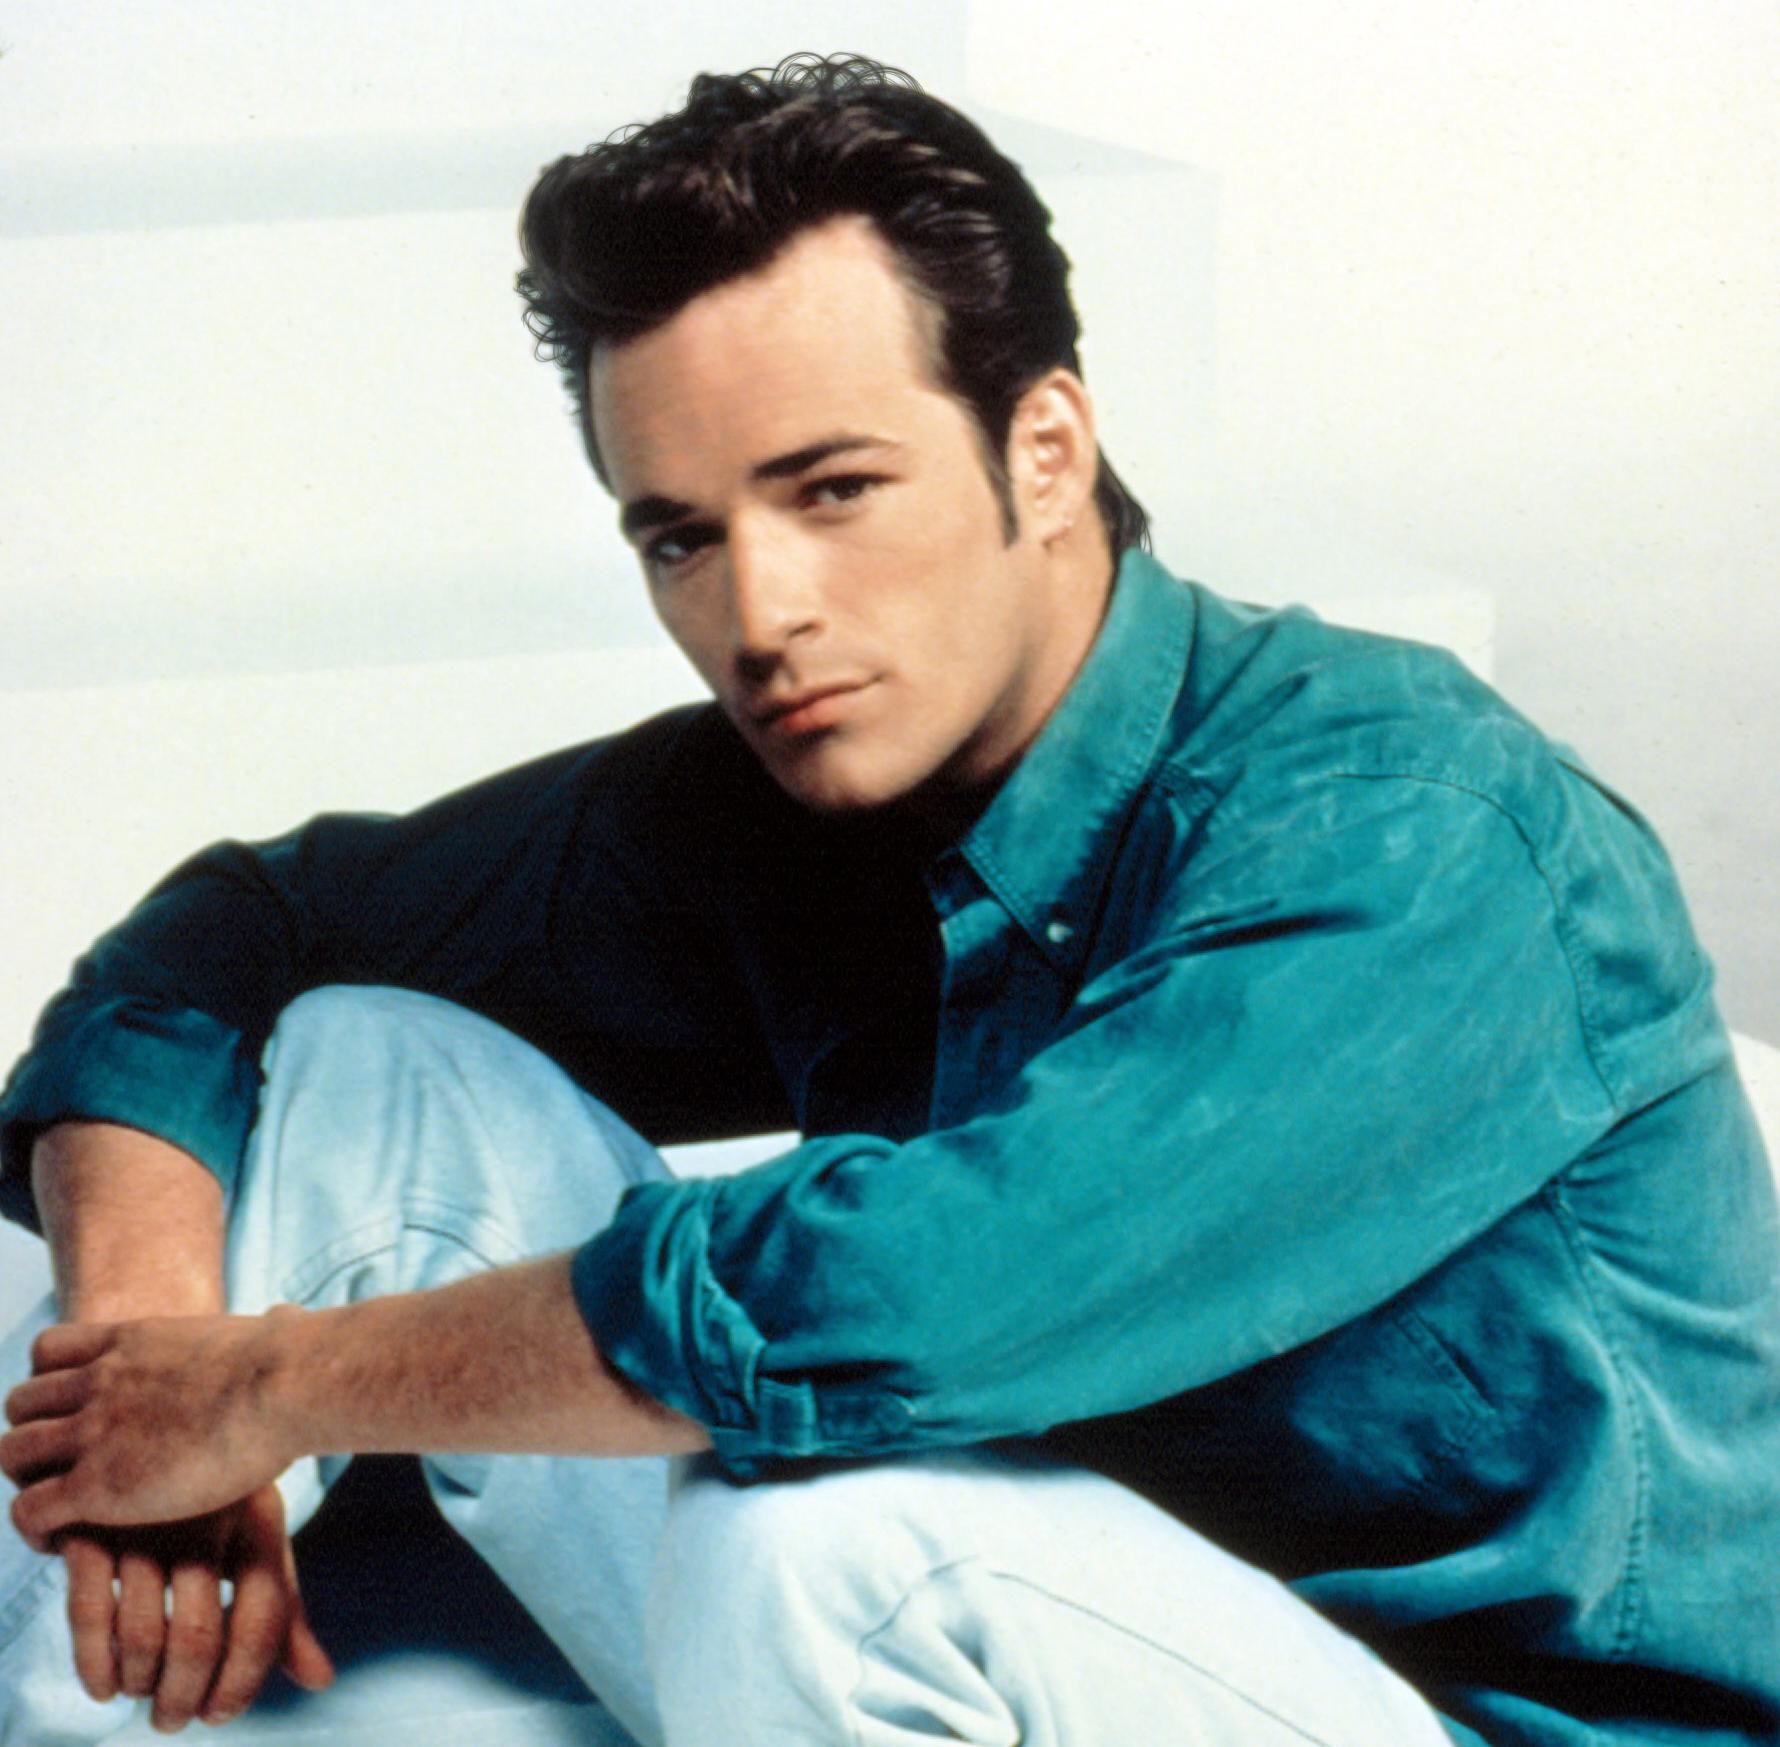 Actor Luke Perry in light blue jeans and a teal collared shirt sitting on some steps giving a smoldering look.